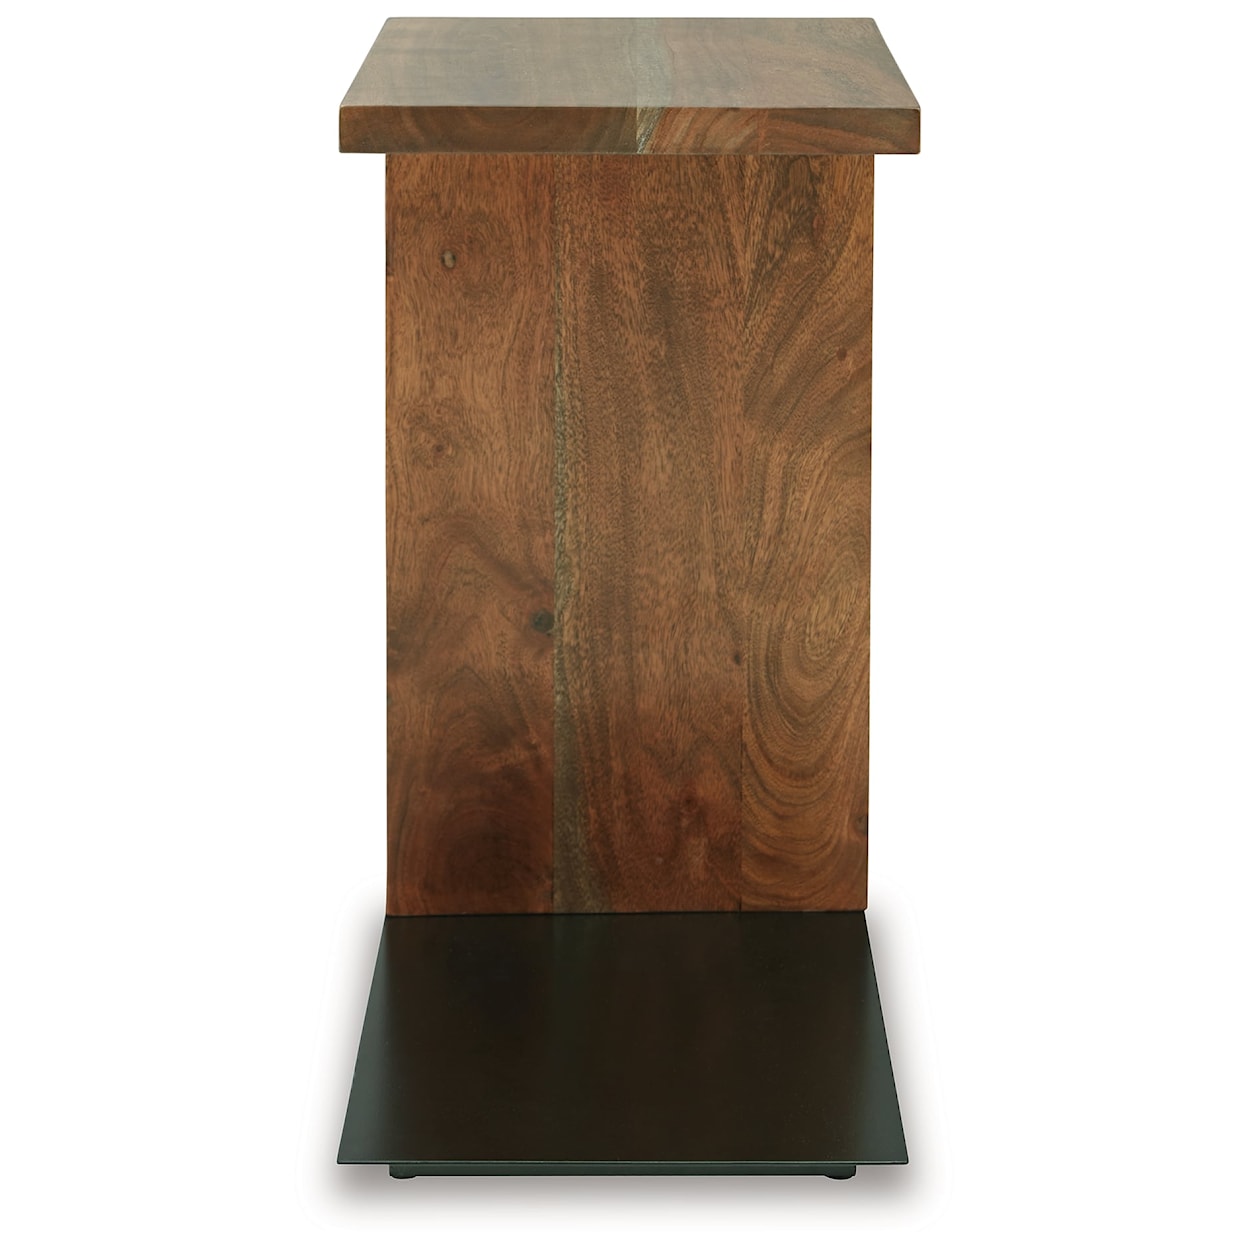 Benchcraft Wimshaw Accent Table